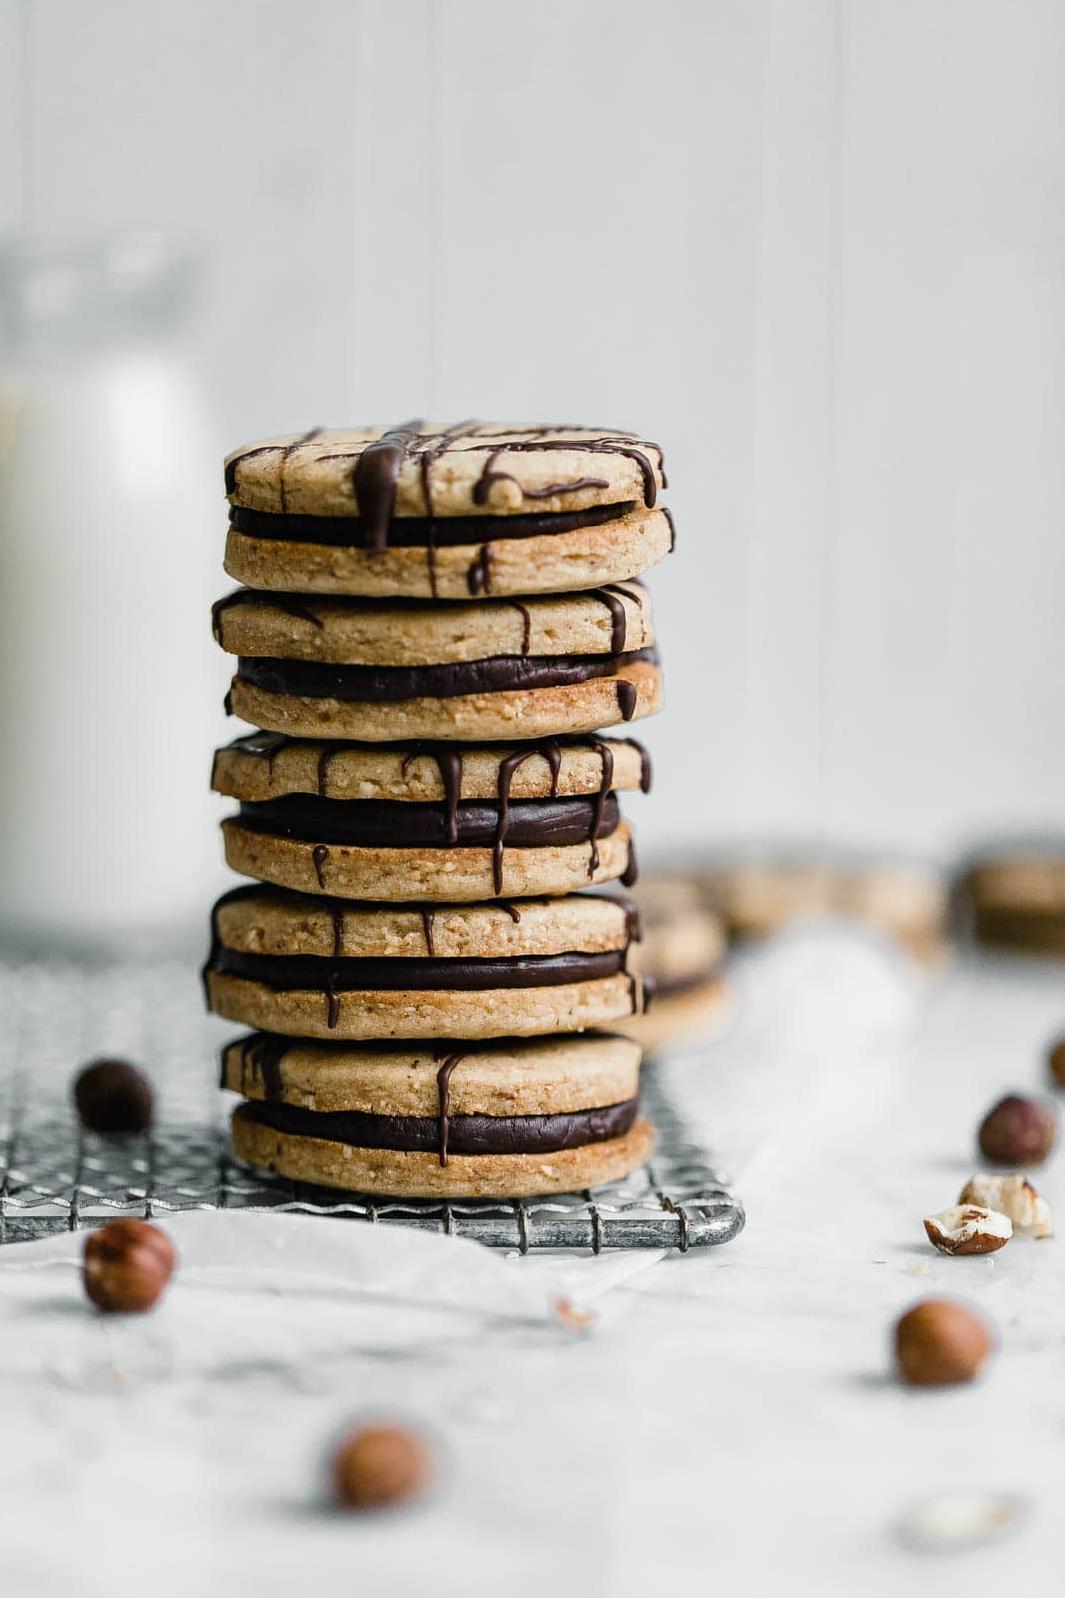  Get ready to fall in love with the nutty texture and smooth espresso flavor of these delectable cookies.